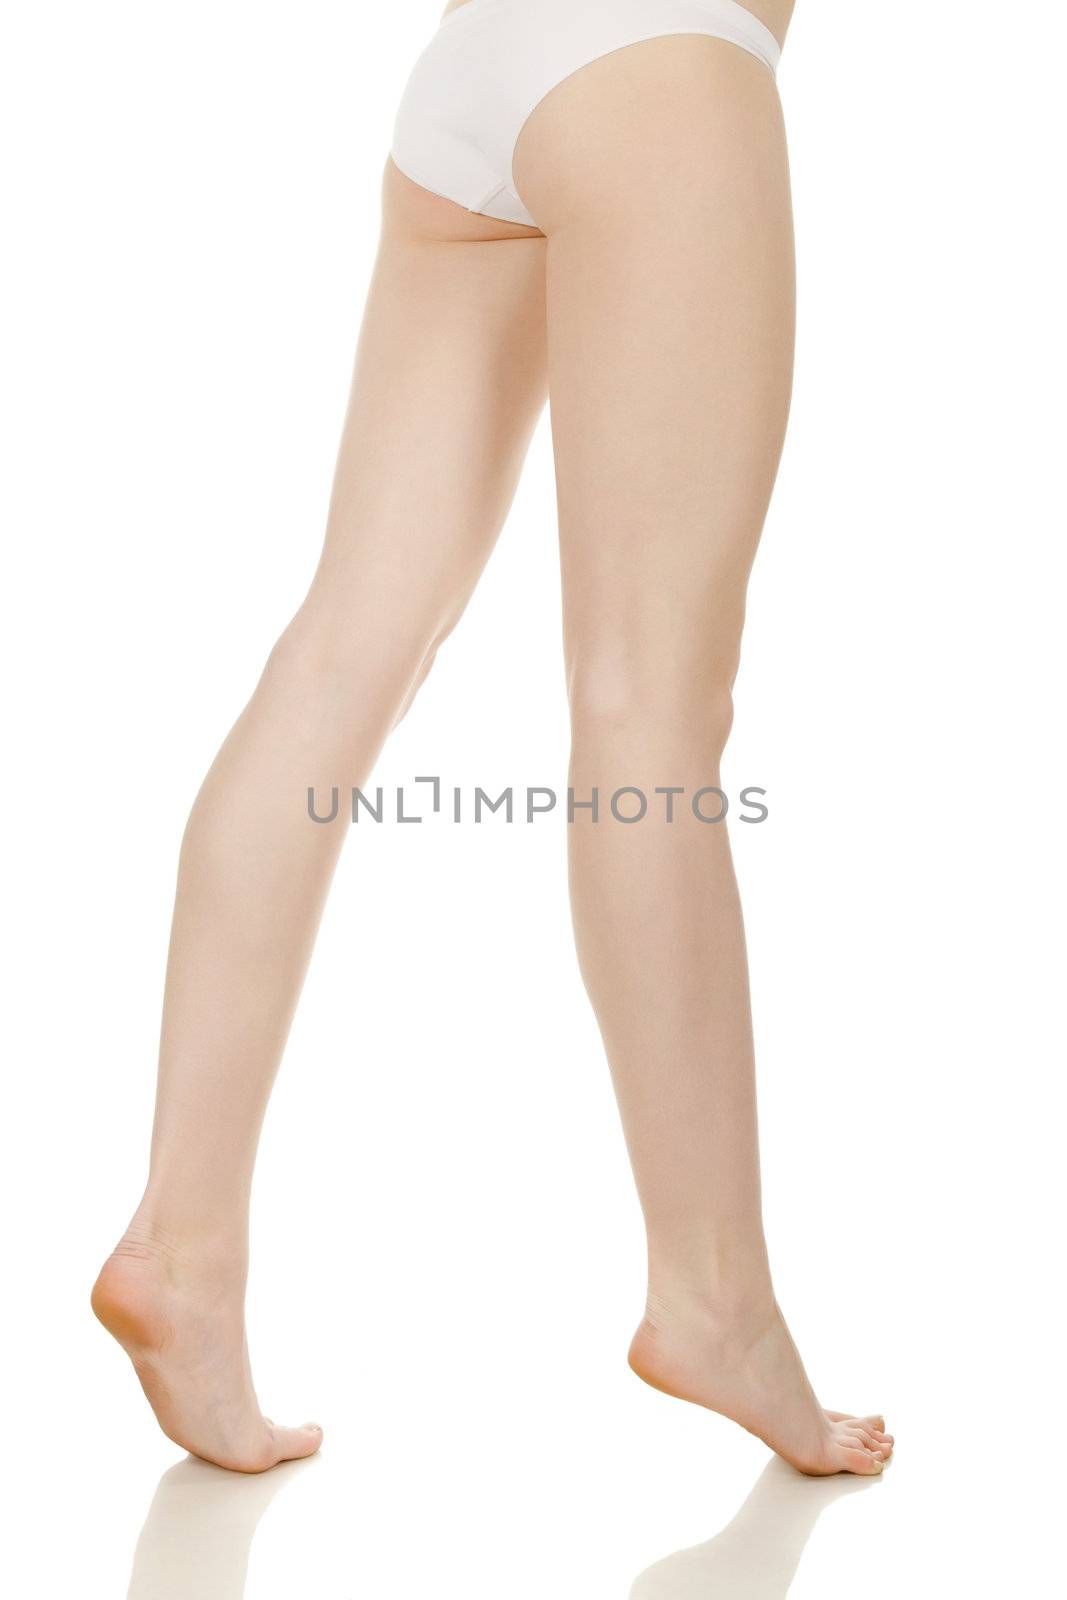 Long pretty woman legs isolated on white background